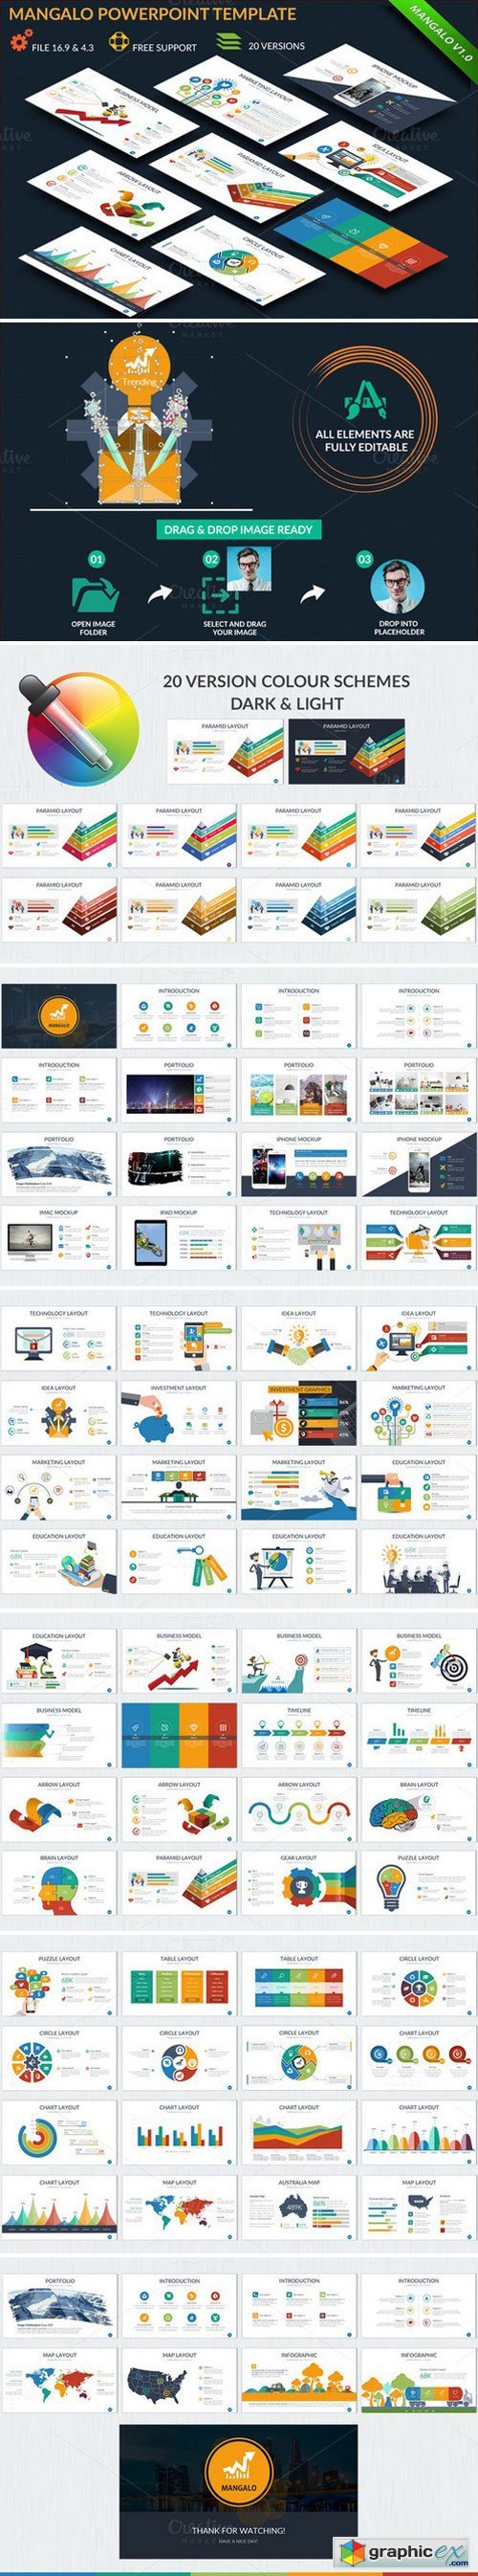 Mangalo Powerpoint Template